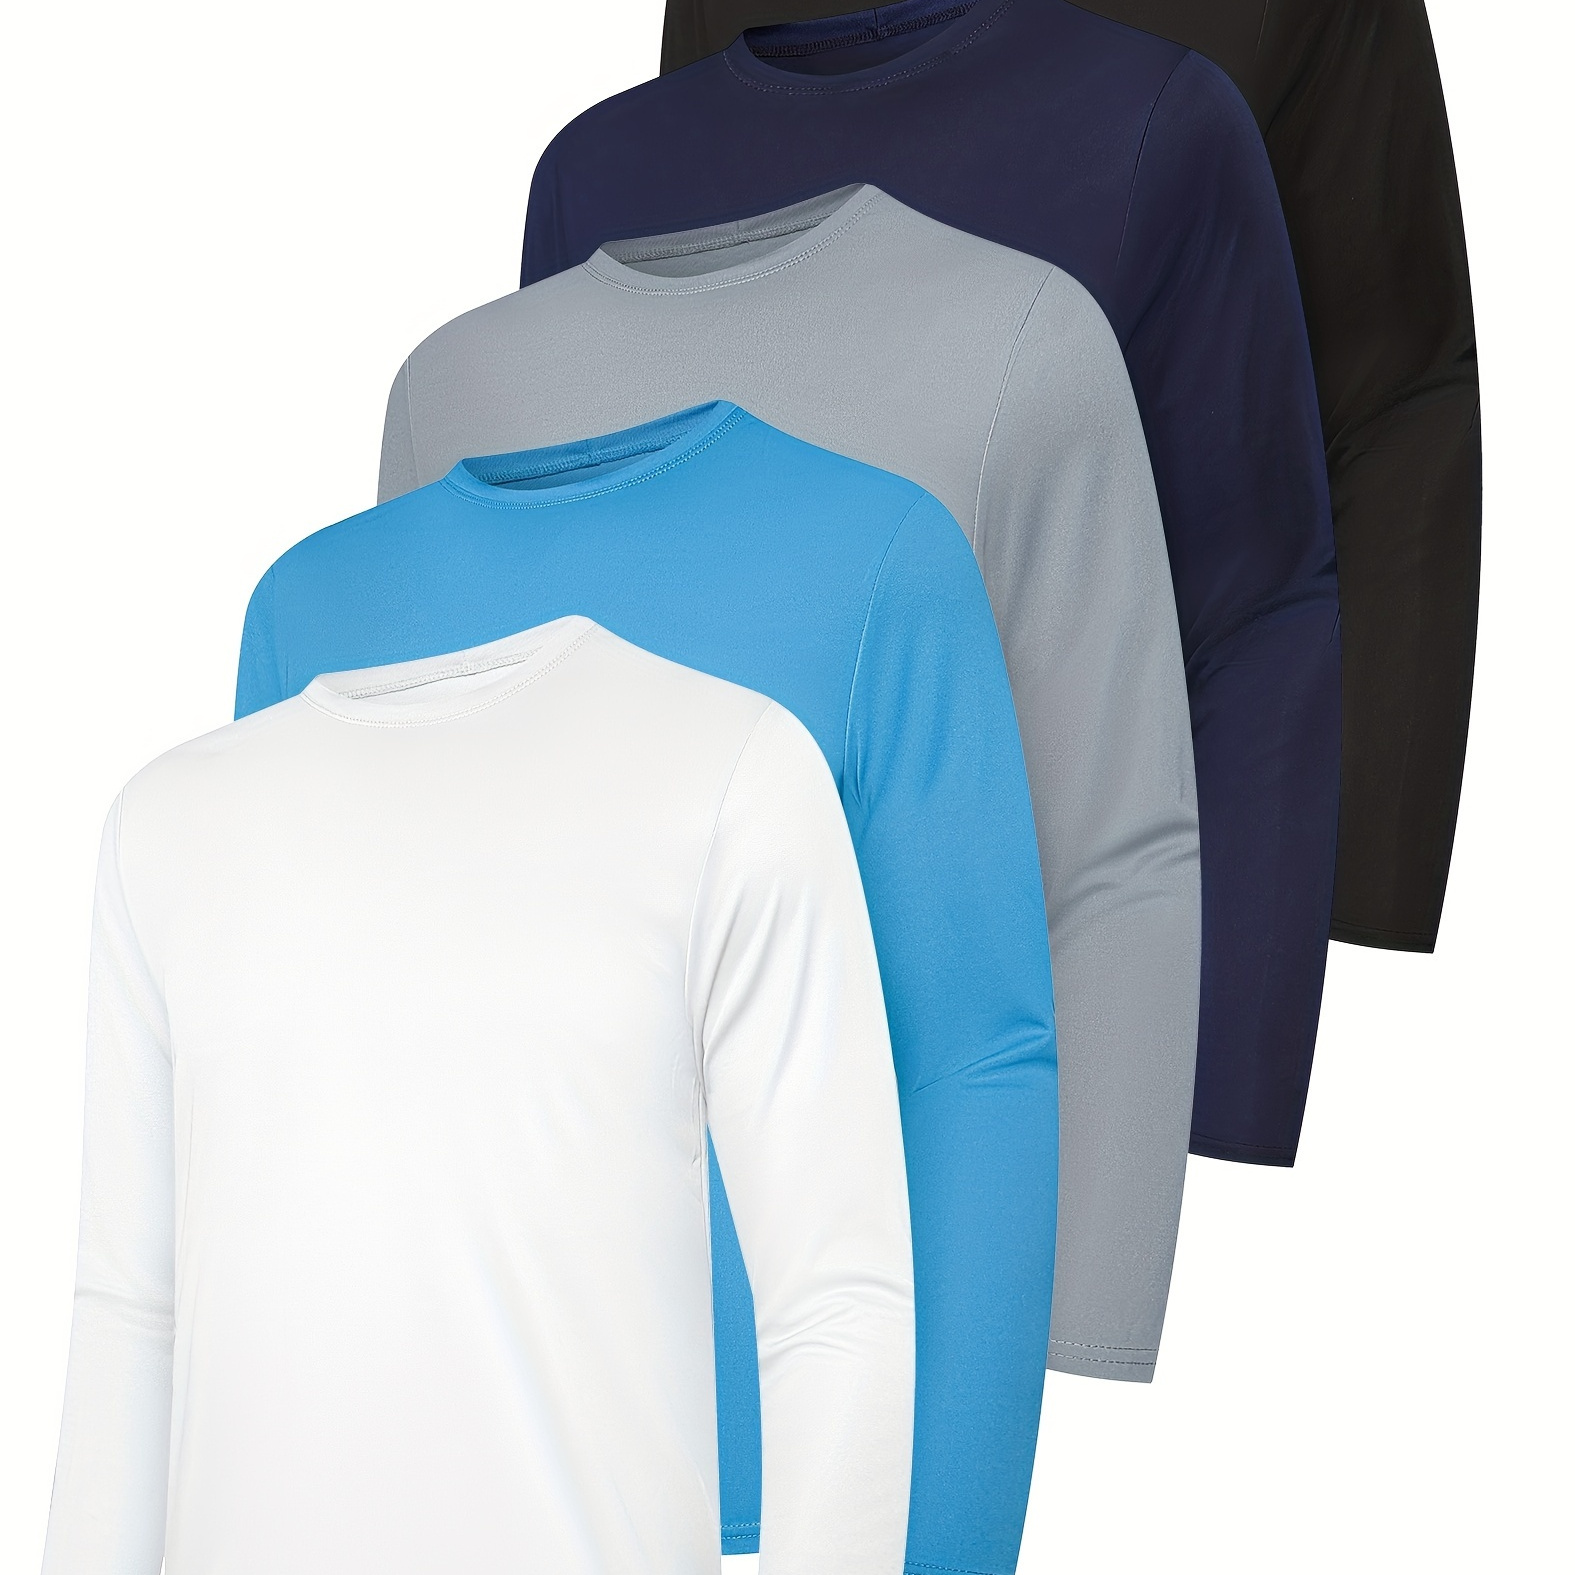 

5-pack Men's Quick-dry Long Sleeve Athletic T-shirts, Running Sports Leisure, Active Workout Top, Multi-color Set